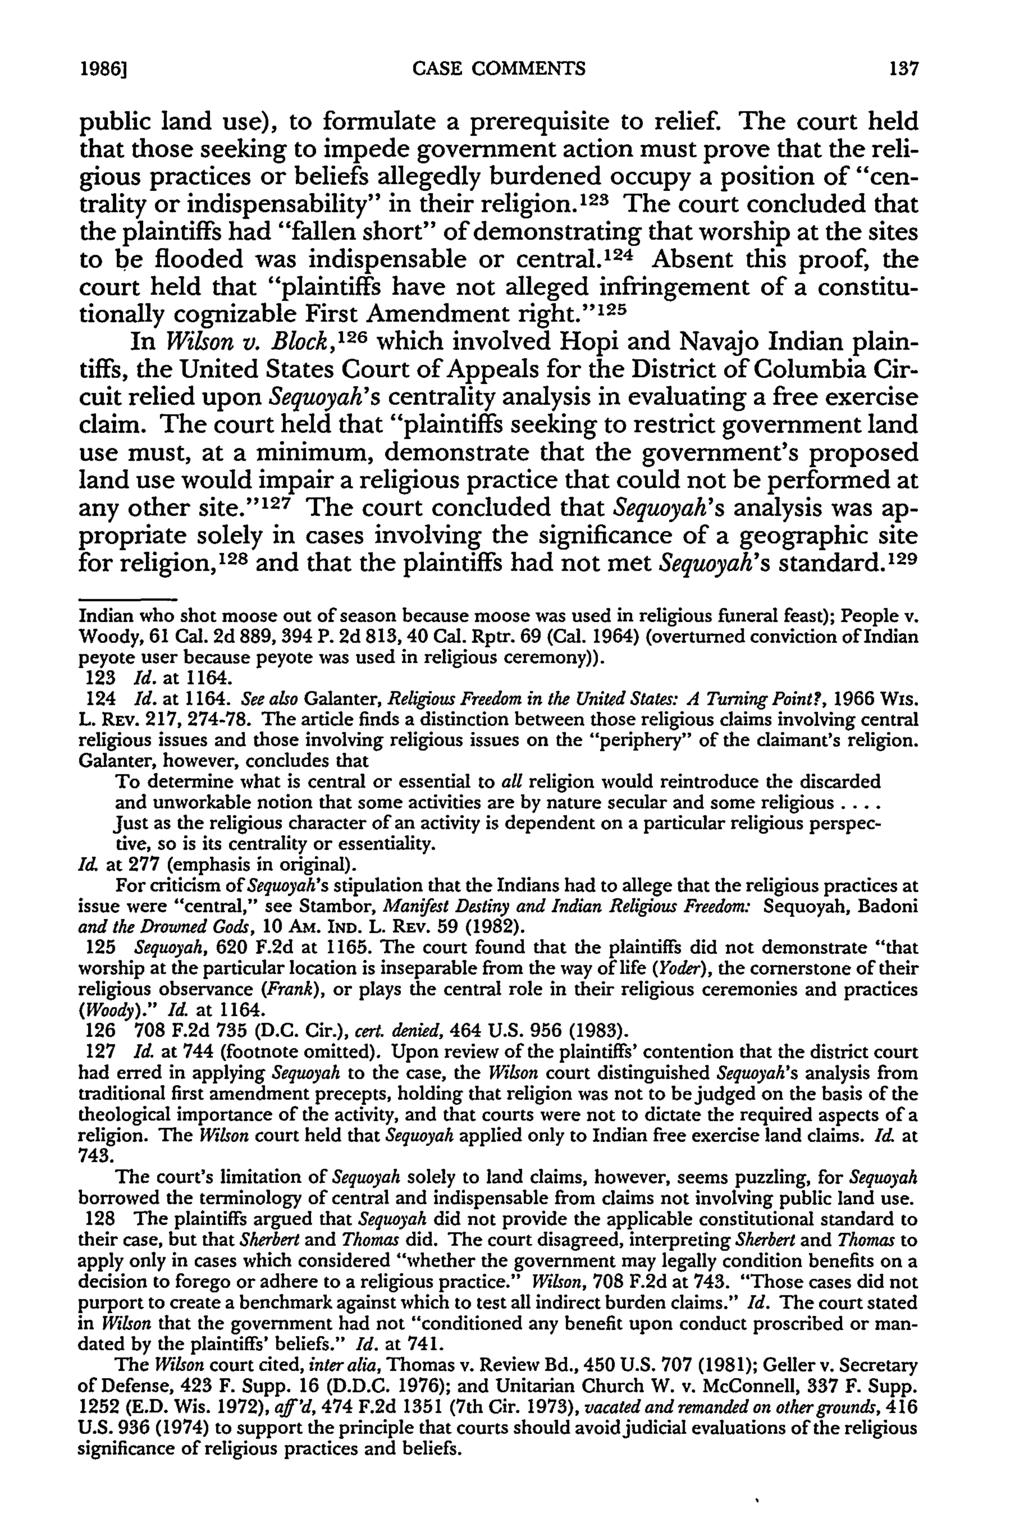 19861 CASE COMMENTS public land use), to formulate a prerequisite to relief.